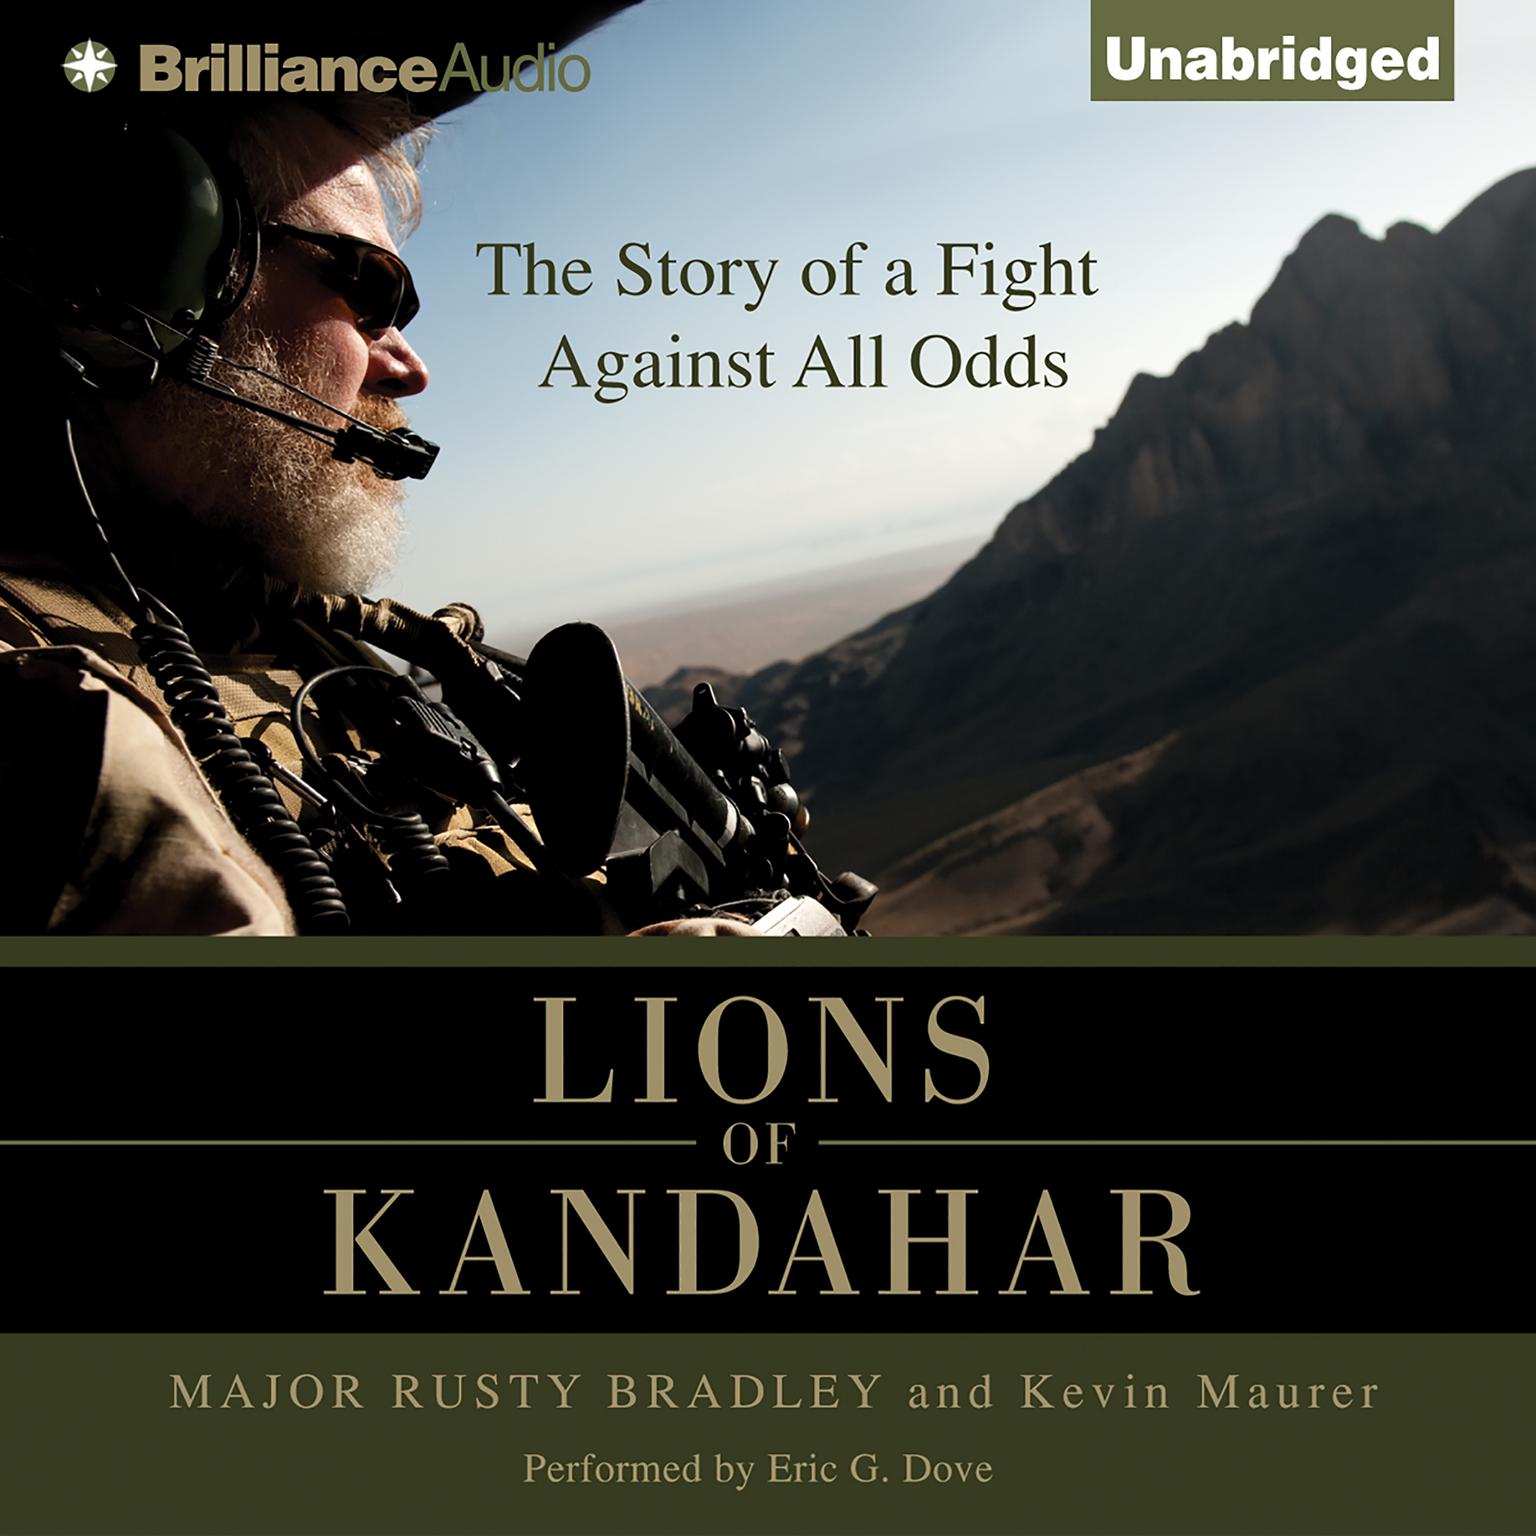 Lions of Kandahar: The Story of a Fight Against All Odds Audiobook, by Major Rusty Bradley